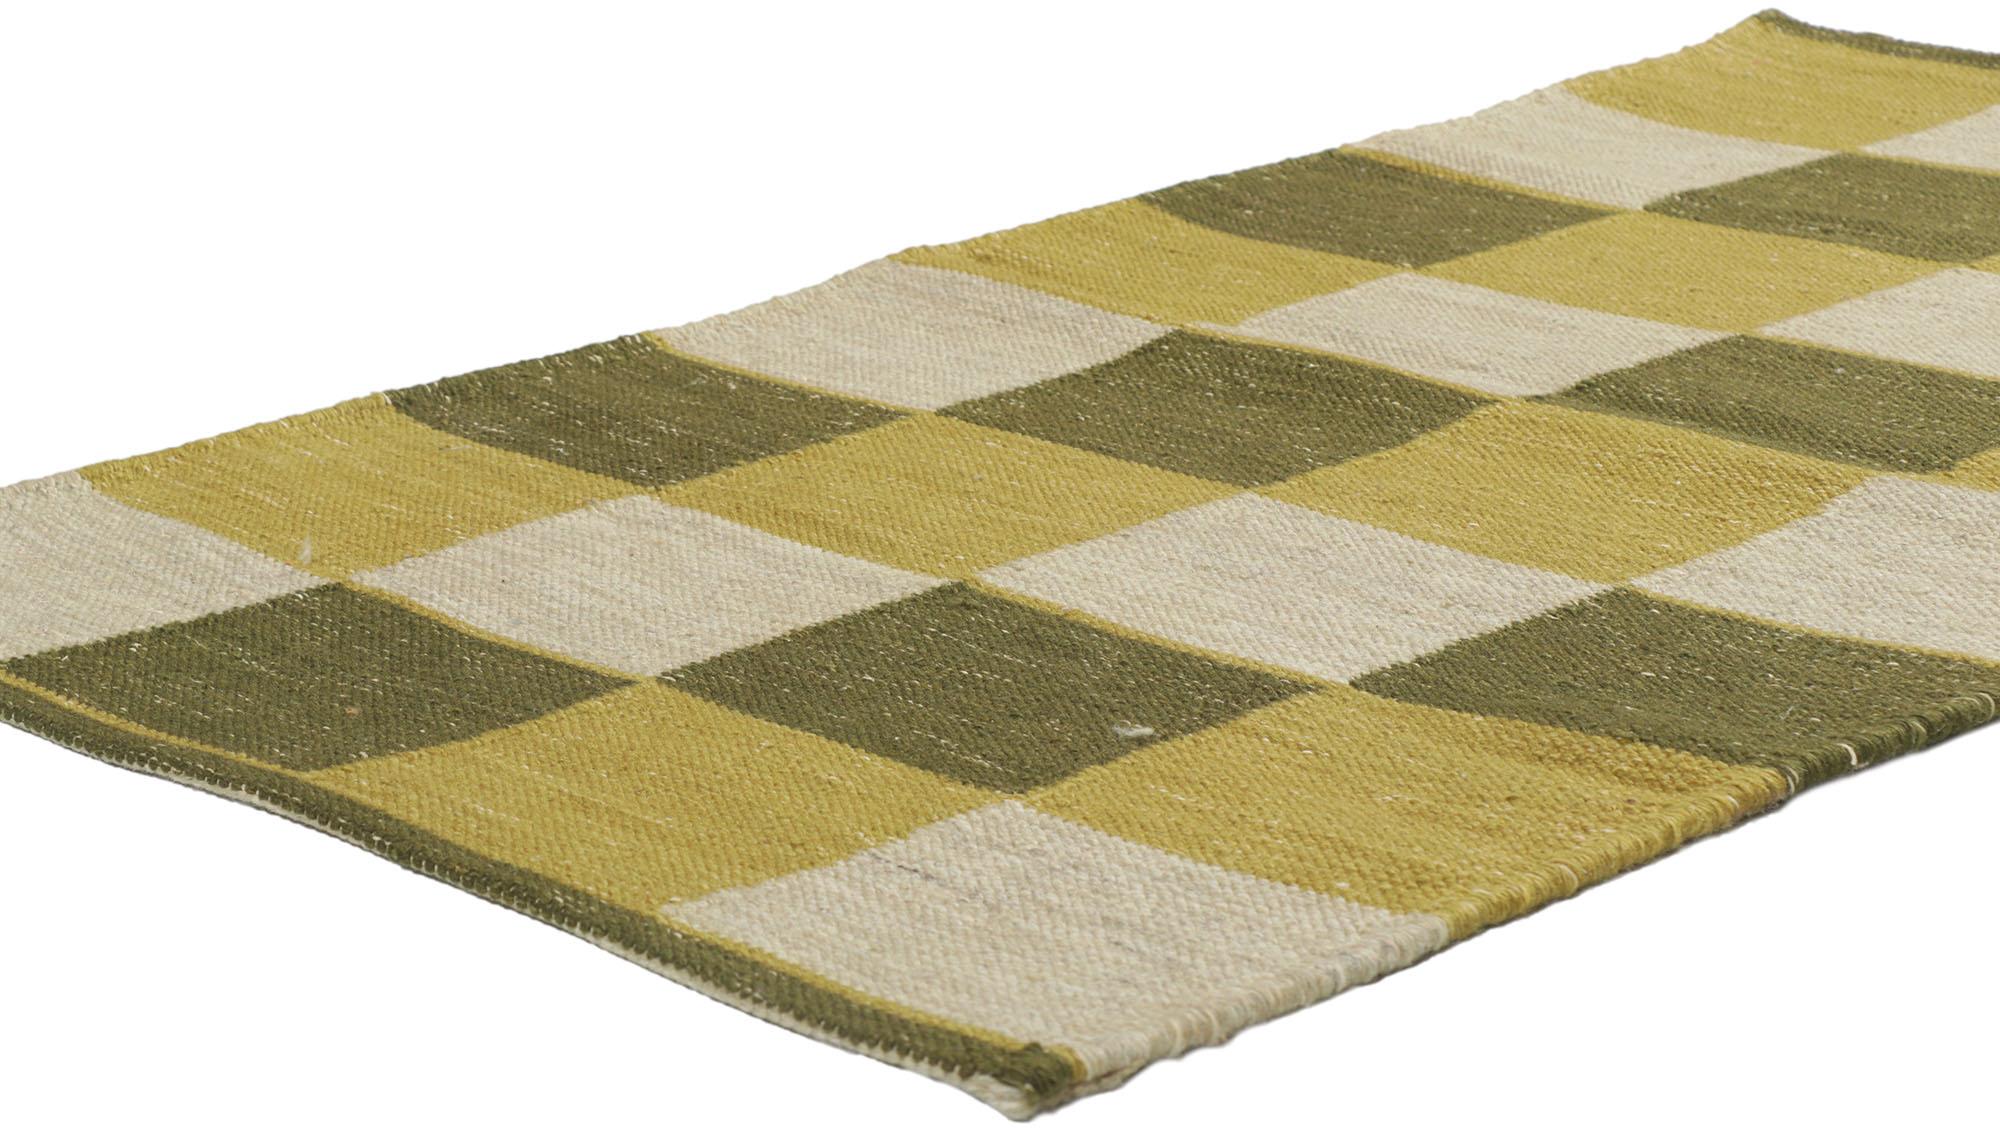 30703 New Swedish Inspired Kilim Rug with Scandinavian Modern Style 02'11 x 04'11. With its geometric design and bohemian hygge vibes, this hand-woven wool Swedish inspired Kilim rug beautifully embodies the simplicity of Scandinavian modern style.